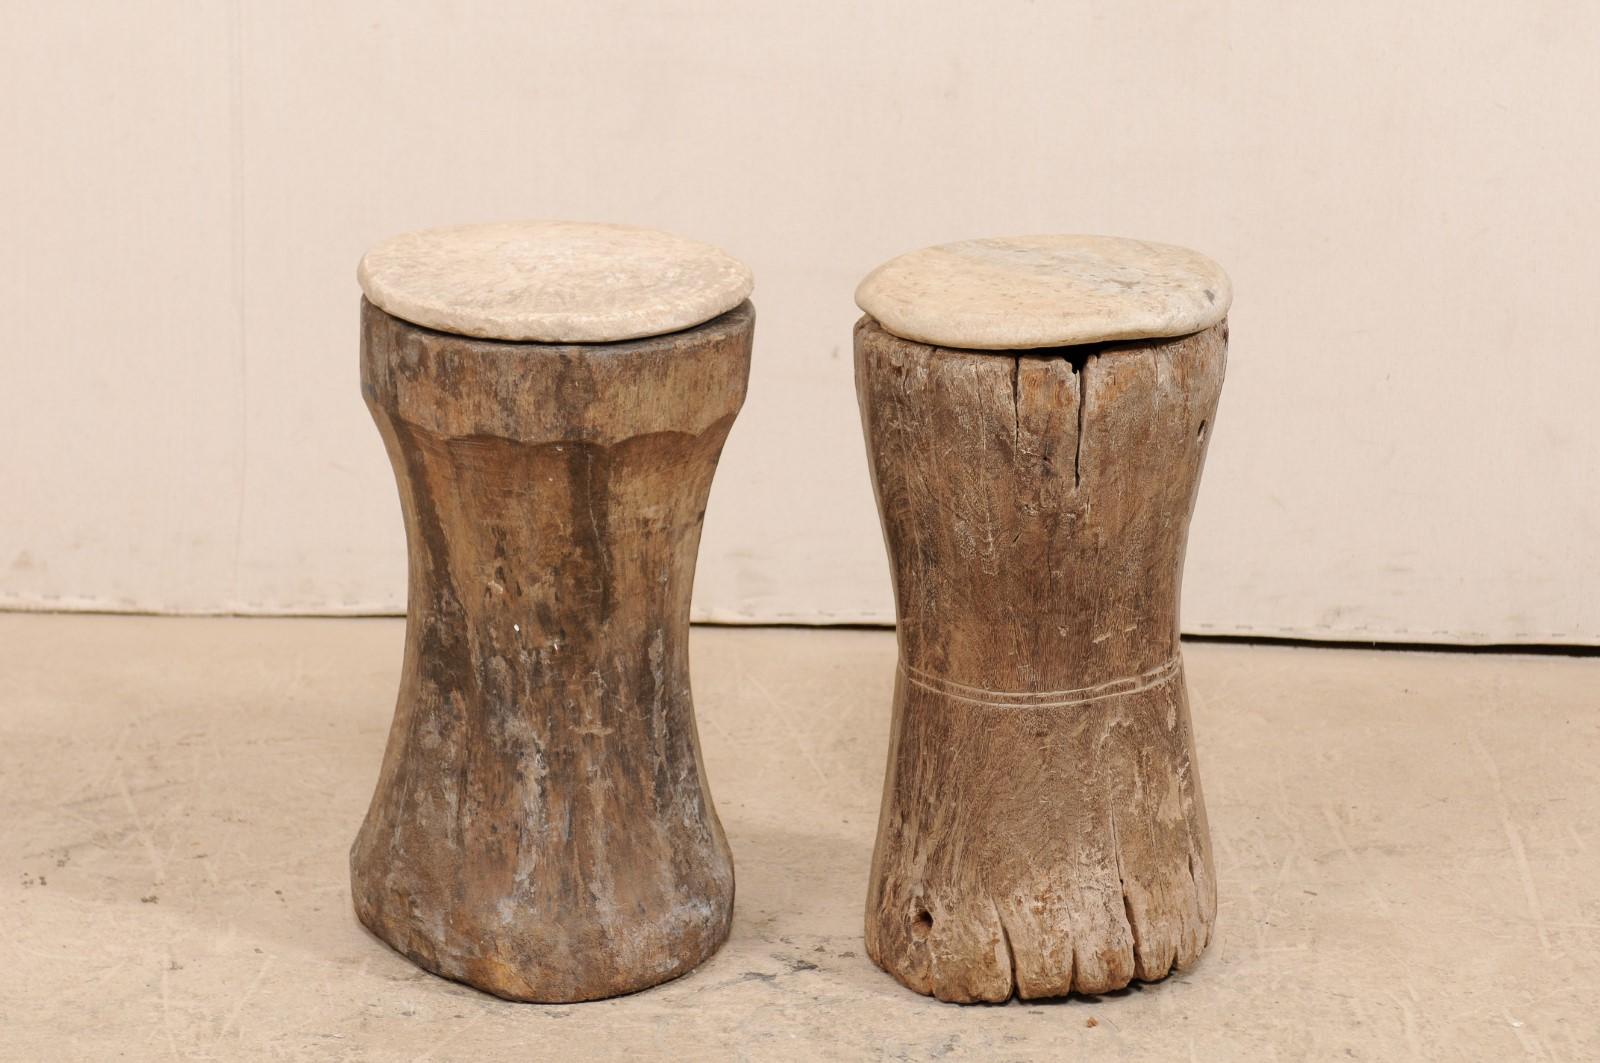 A pair of 19th century wooden mortar with stone top drinks or side tables. This unique pair of small-sized tables have been fashioned out of a pair of 19th century hand-carved wooden mortars from South Indian (Kerala), which have been topped with